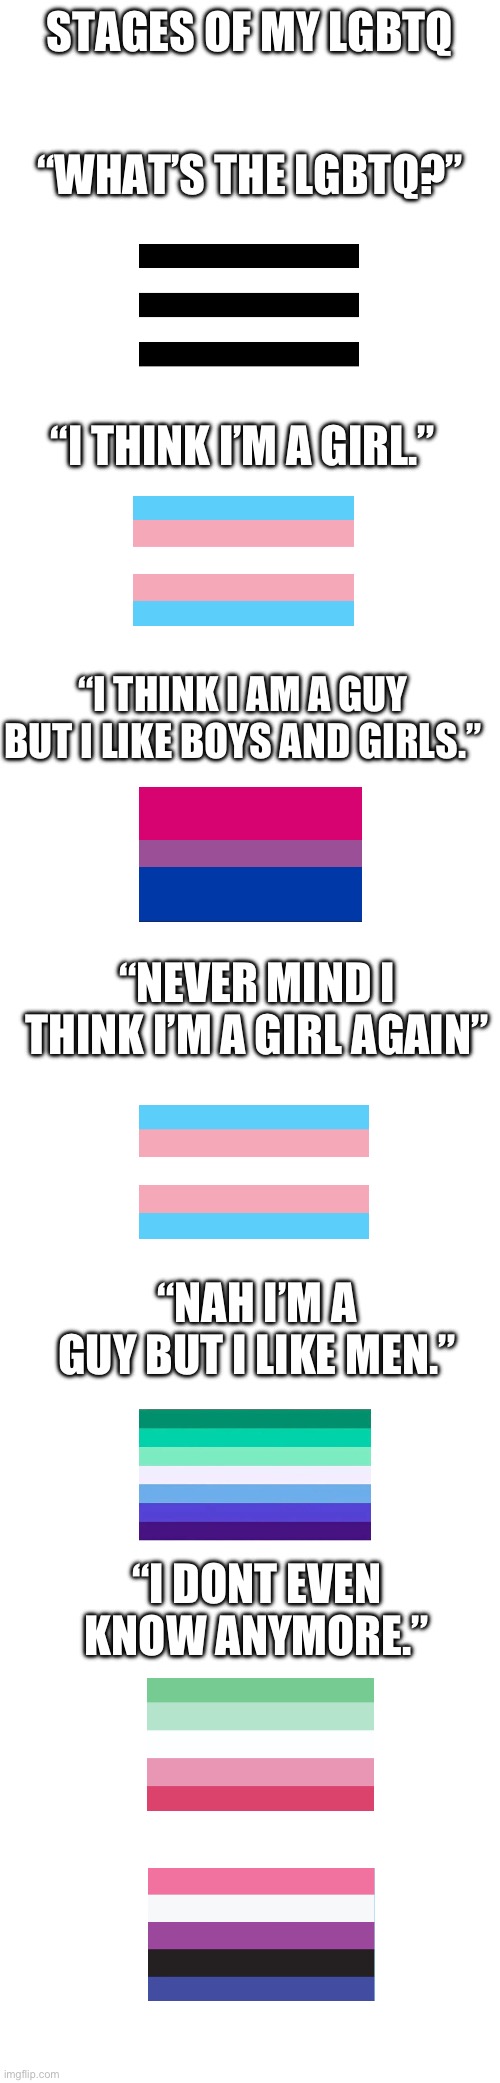 Stages of my LGBTQ | STAGES OF MY LGBTQ; “WHAT’S THE LGBTQ?”; “I THINK I’M A GIRL.”; “I THINK I AM A GUY BUT I LIKE BOYS AND GIRLS.”; “NEVER MIND I THINK I’M A GIRL AGAIN”; “NAH I’M A GUY BUT I LIKE MEN.”; “I DONT EVEN KNOW ANYMORE.” | image tagged in lgbtq,lgbt,memes,funny | made w/ Imgflip meme maker